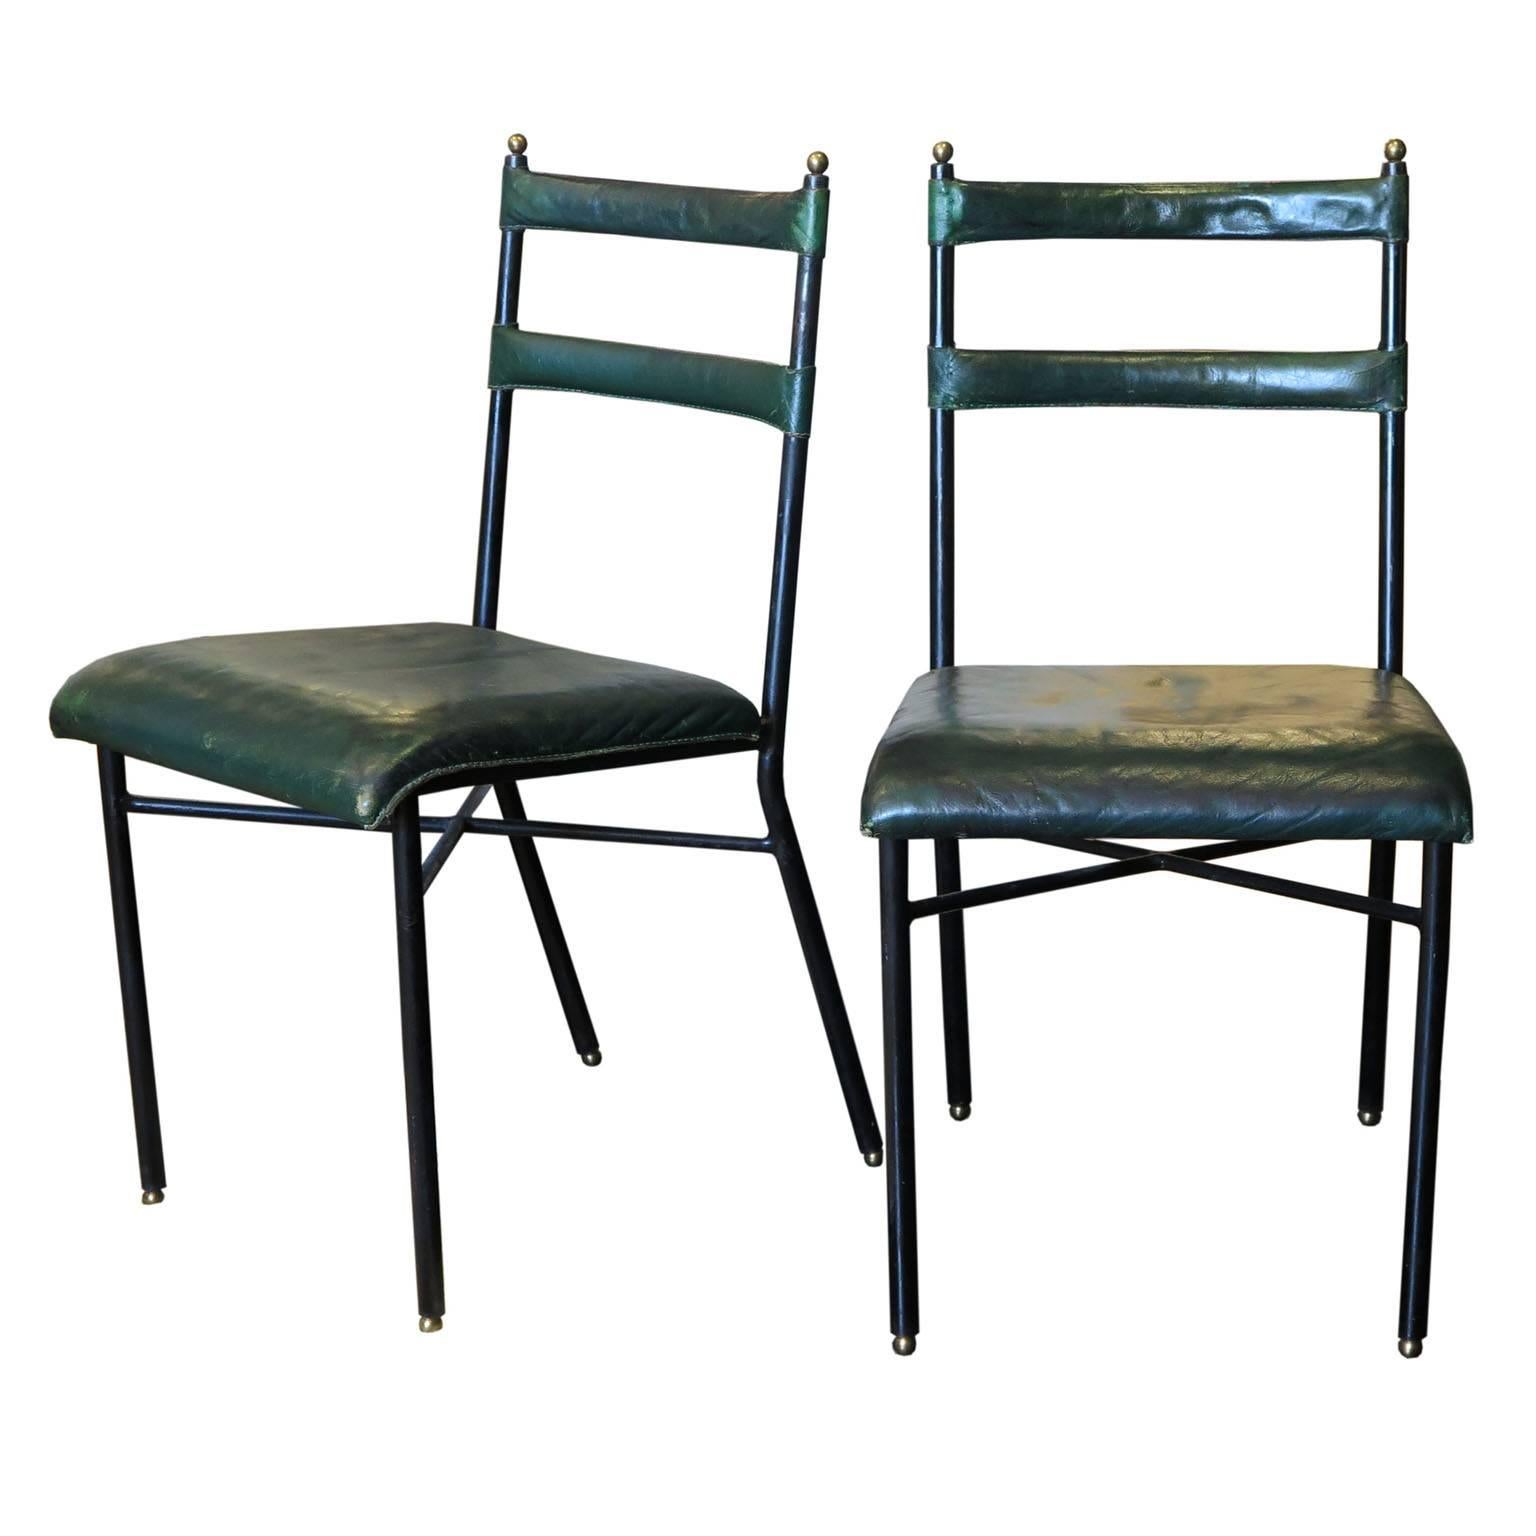 Pair of Original Jacques Adnet Chairs, 1950s